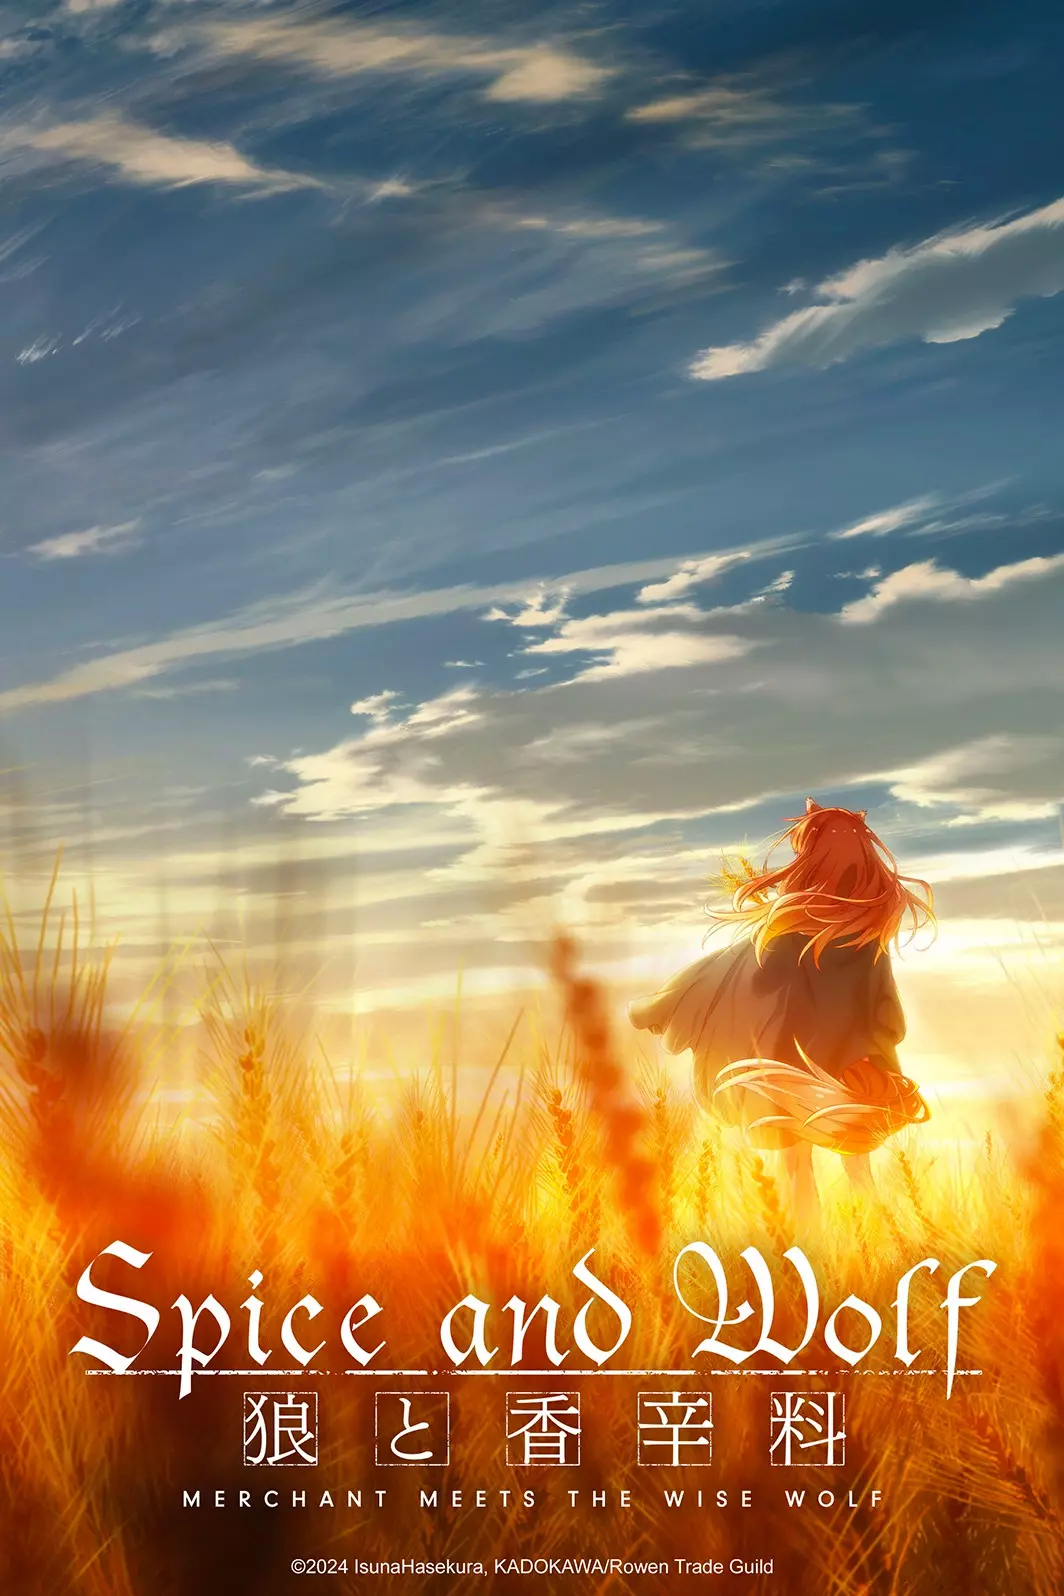 vidéo manga - Spice and Wolf - Merchant meets the wise wolf